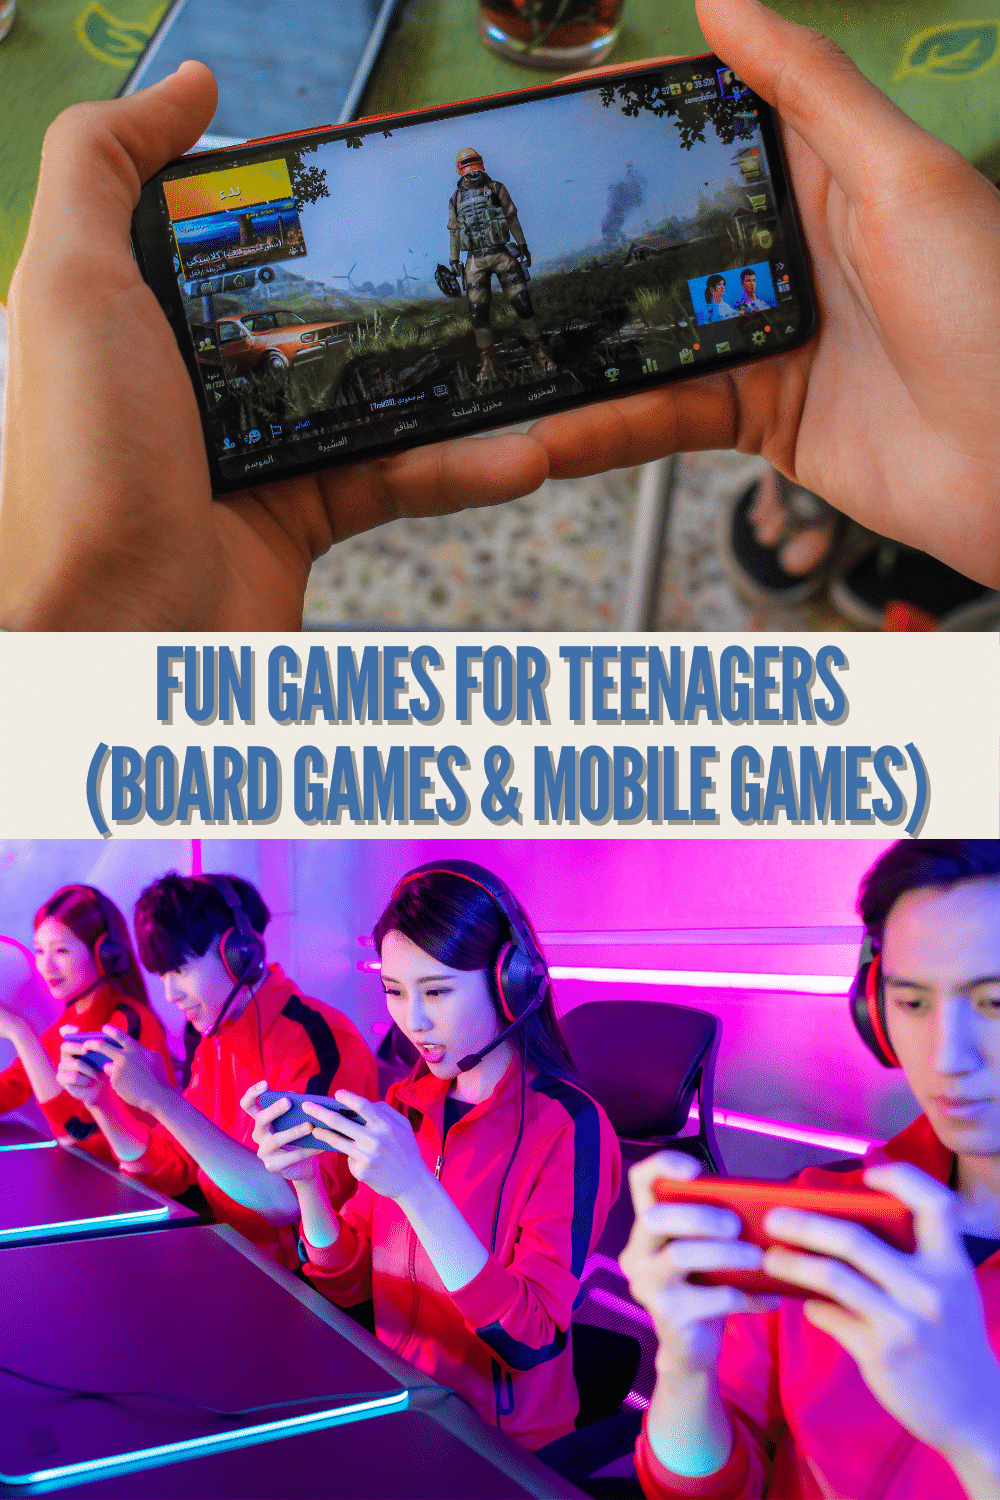 It's not impossible to keep a group of teens entertained in a way that moms approve. These games all get mom AND teens stamp of approval. #teens #games #boardgames #mobilegames via @wondermomwannab